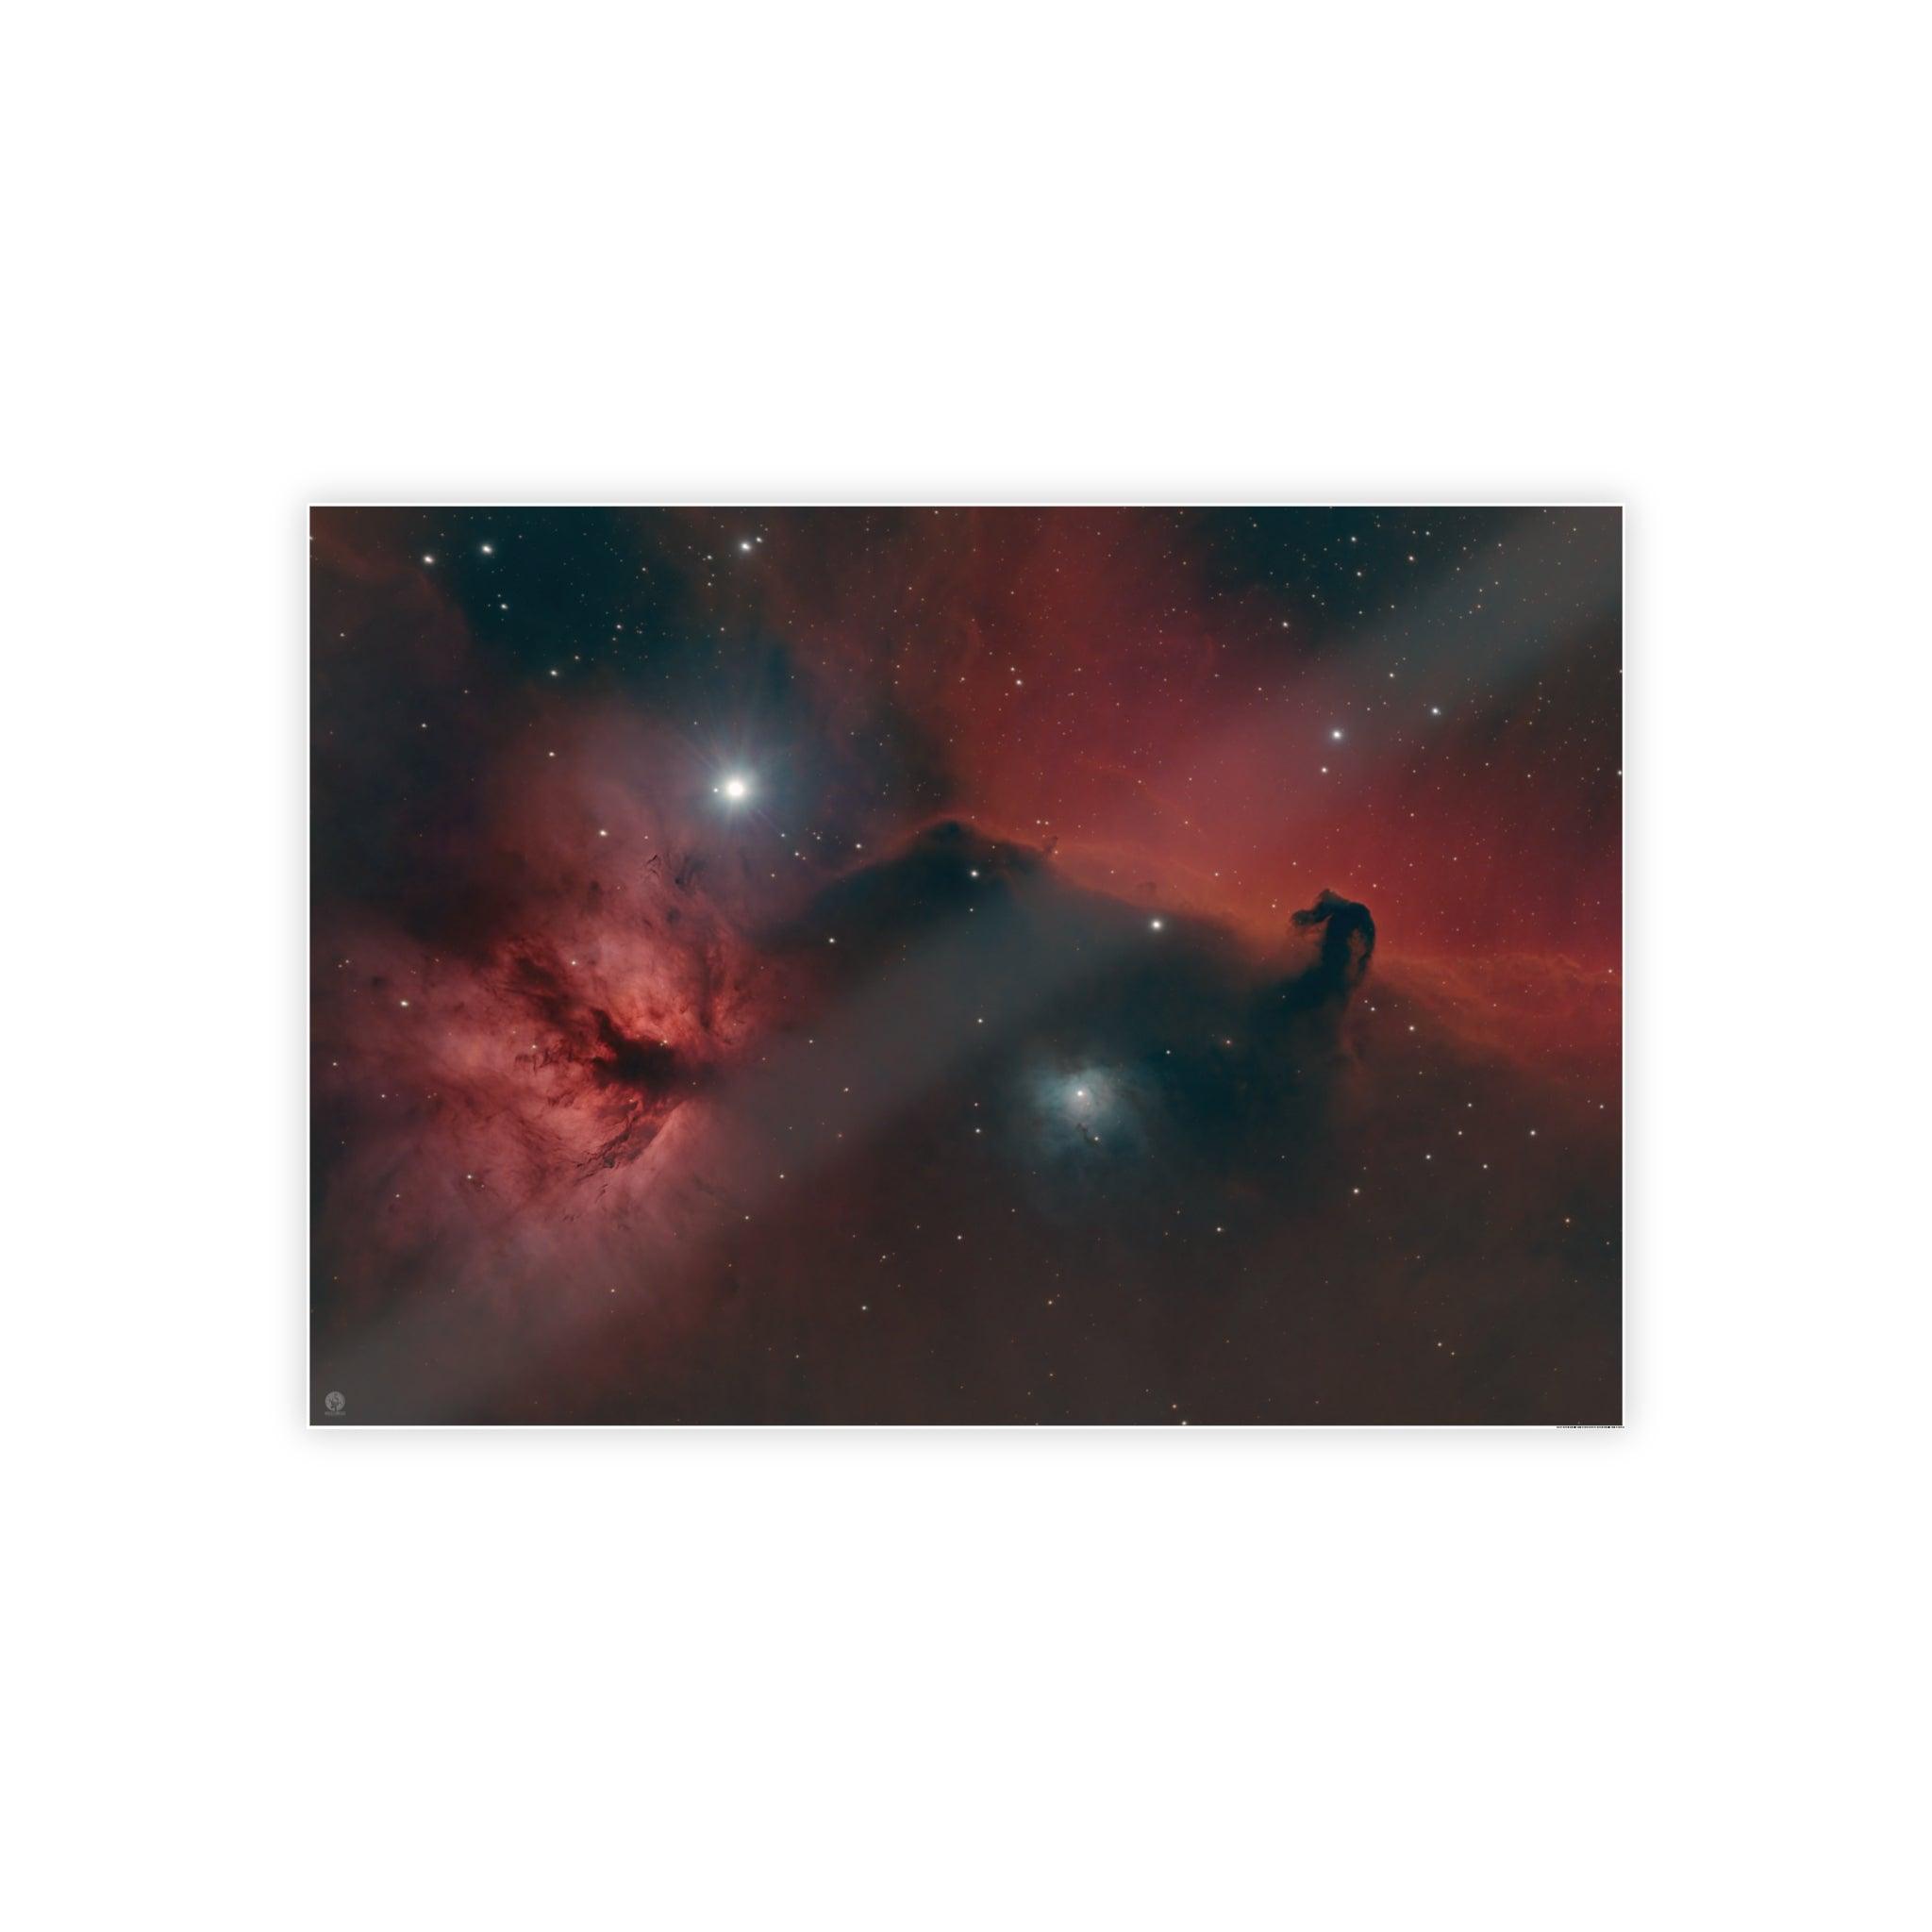 Poster of the Horsehead and Flame Nebulae